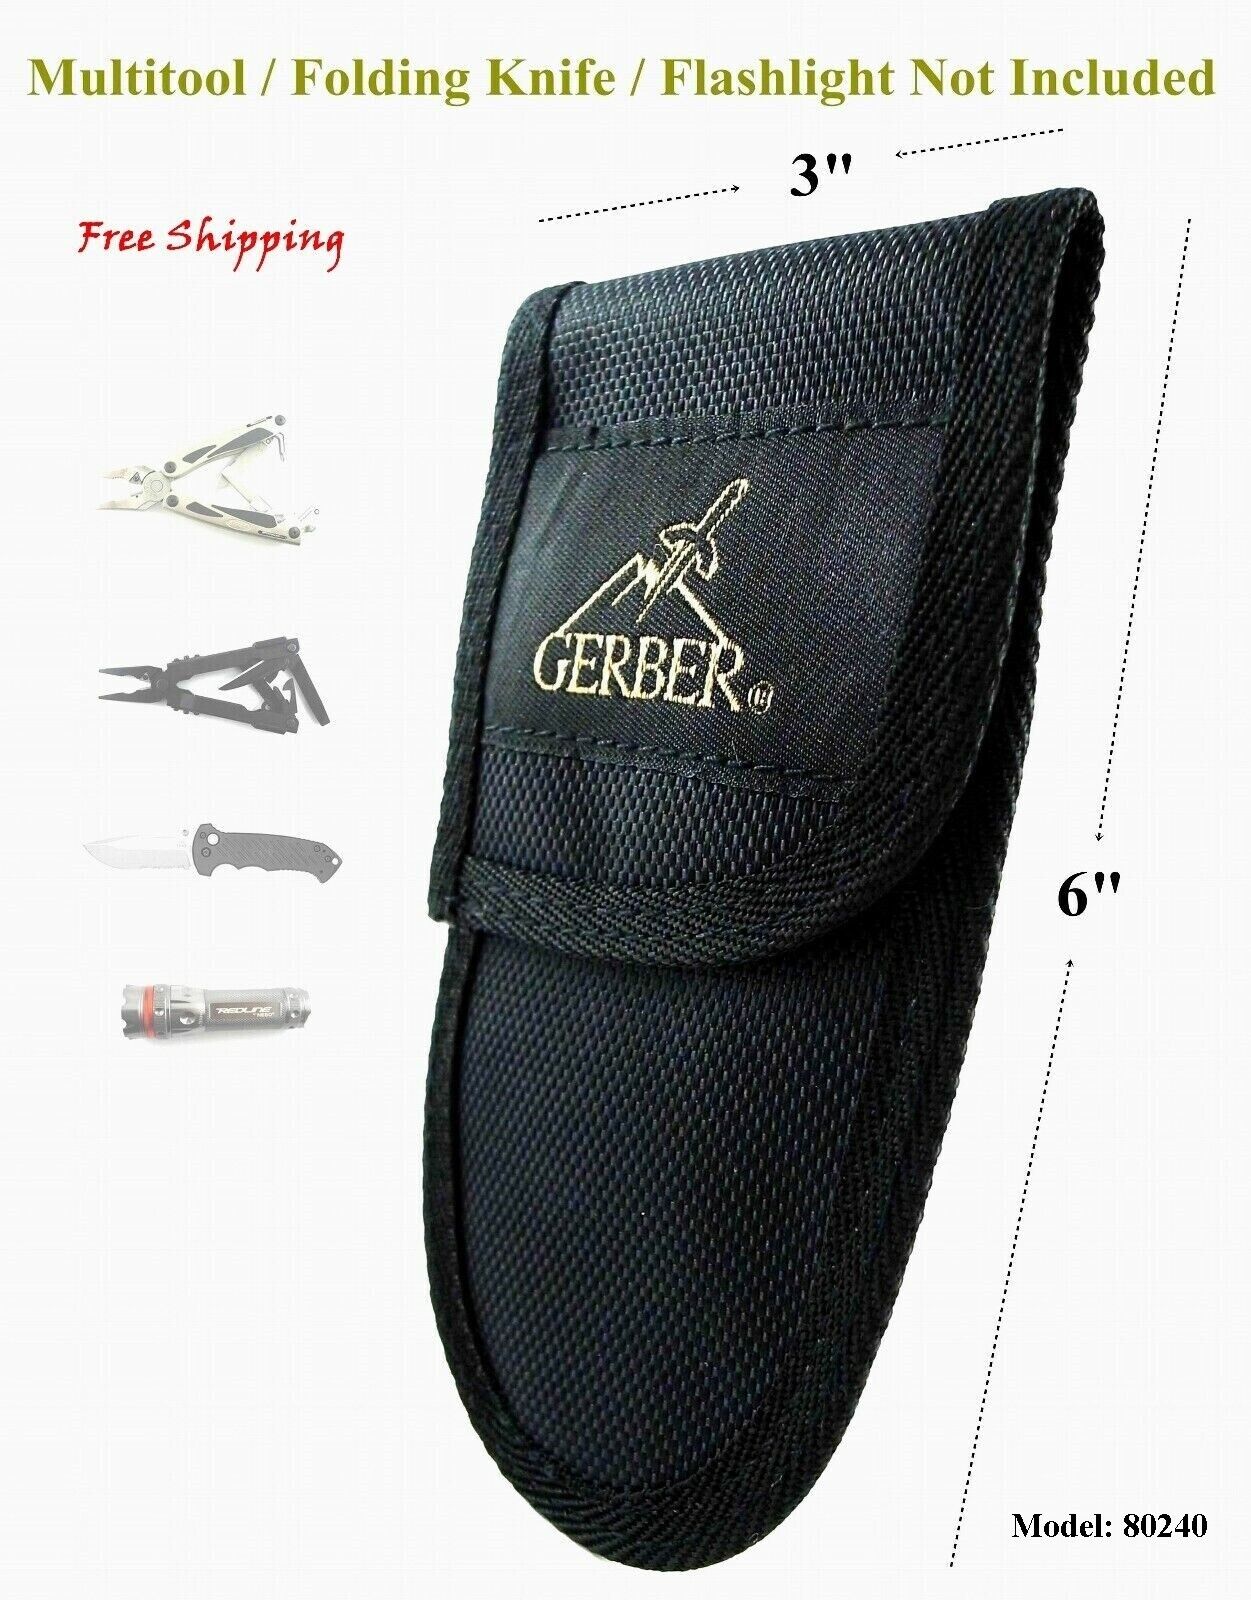 1pc. LARGE SIZE, NEW, 15 x 8cm UNUSED GERBER MULTI TOOL POUCH SHEATH BUY IT NOW